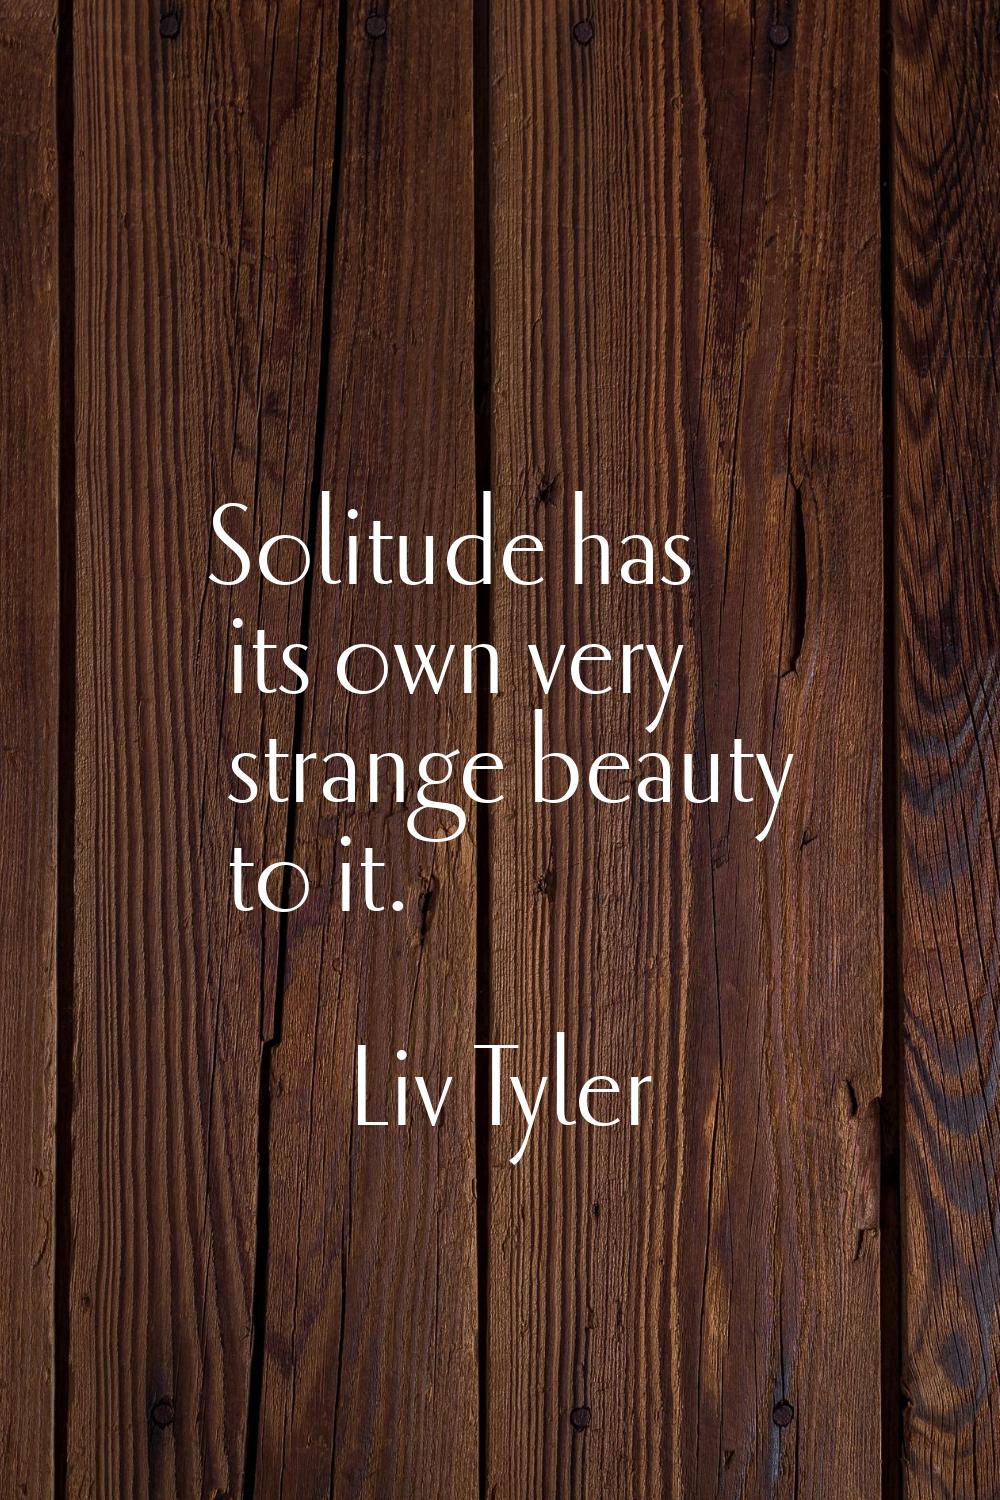 Solitude has its own very strange beauty to it.